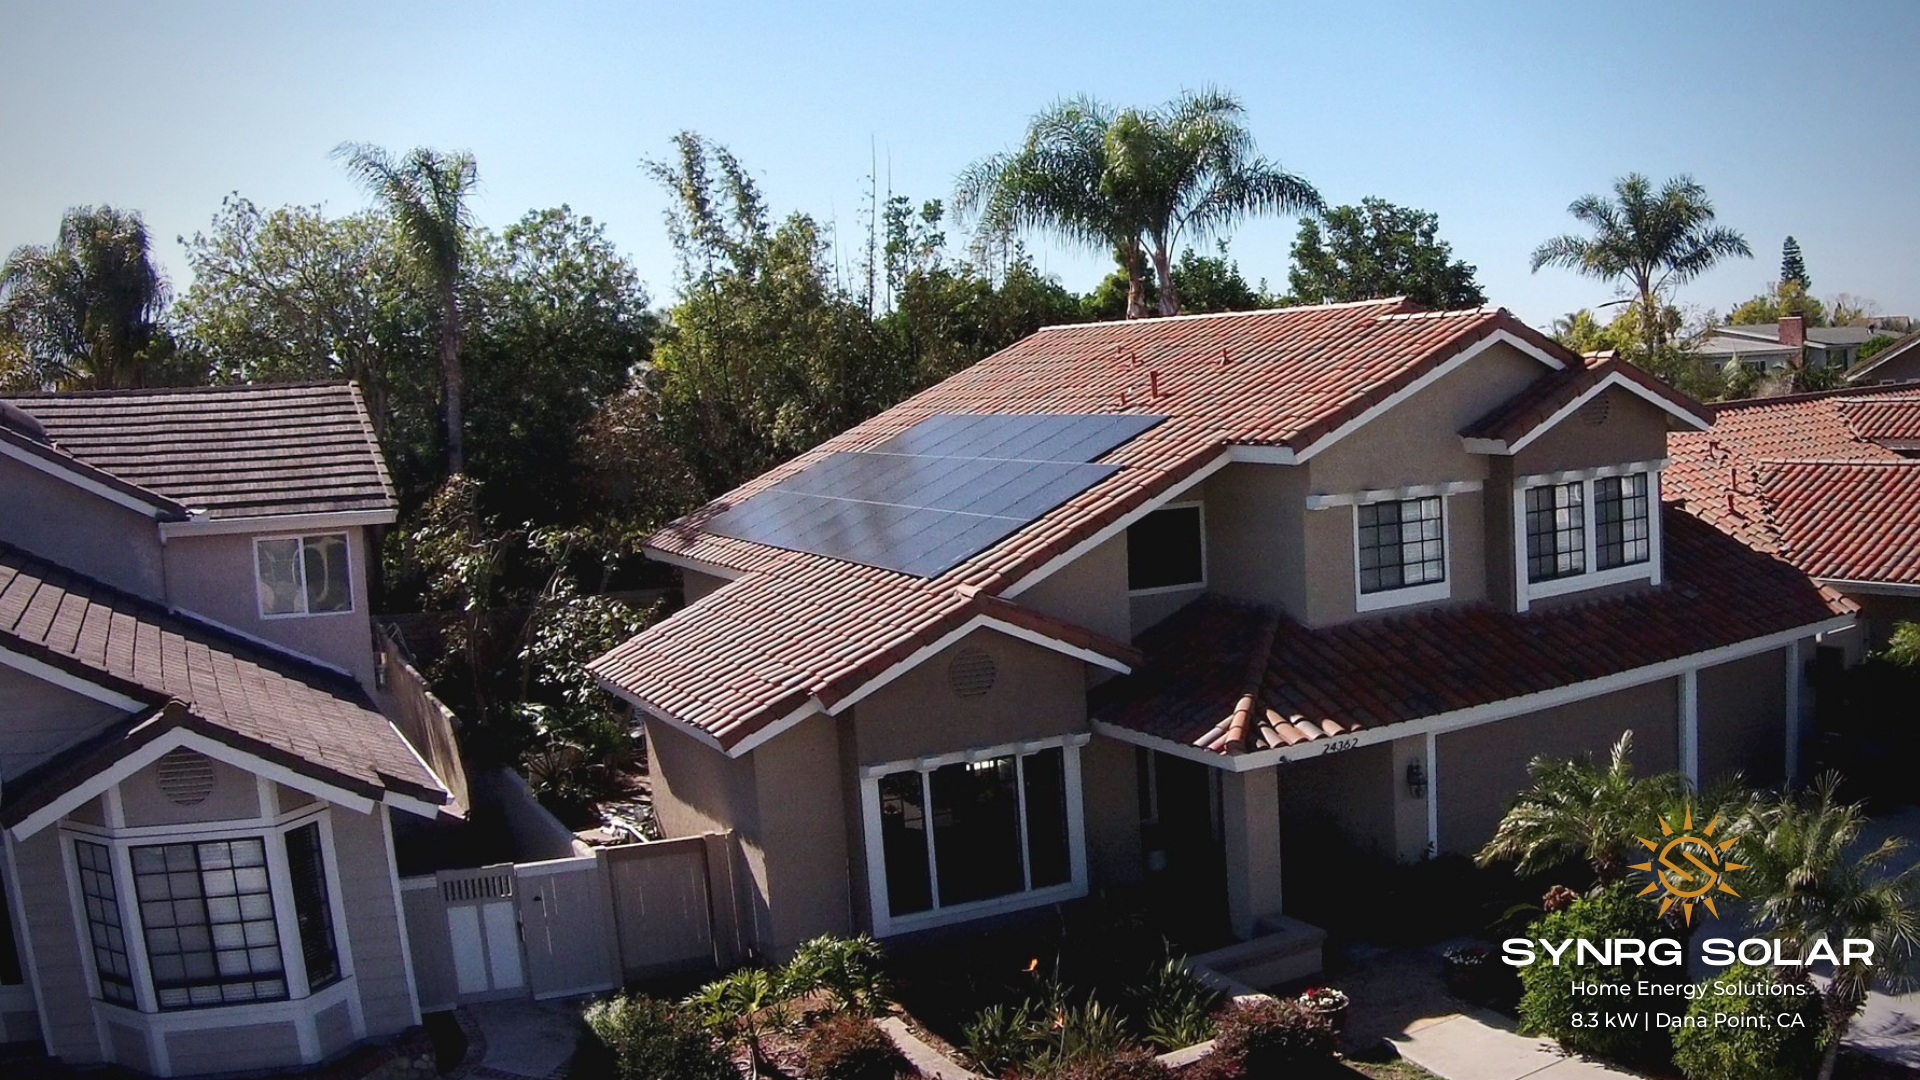 How much should a 6.6 KW solar system cost?